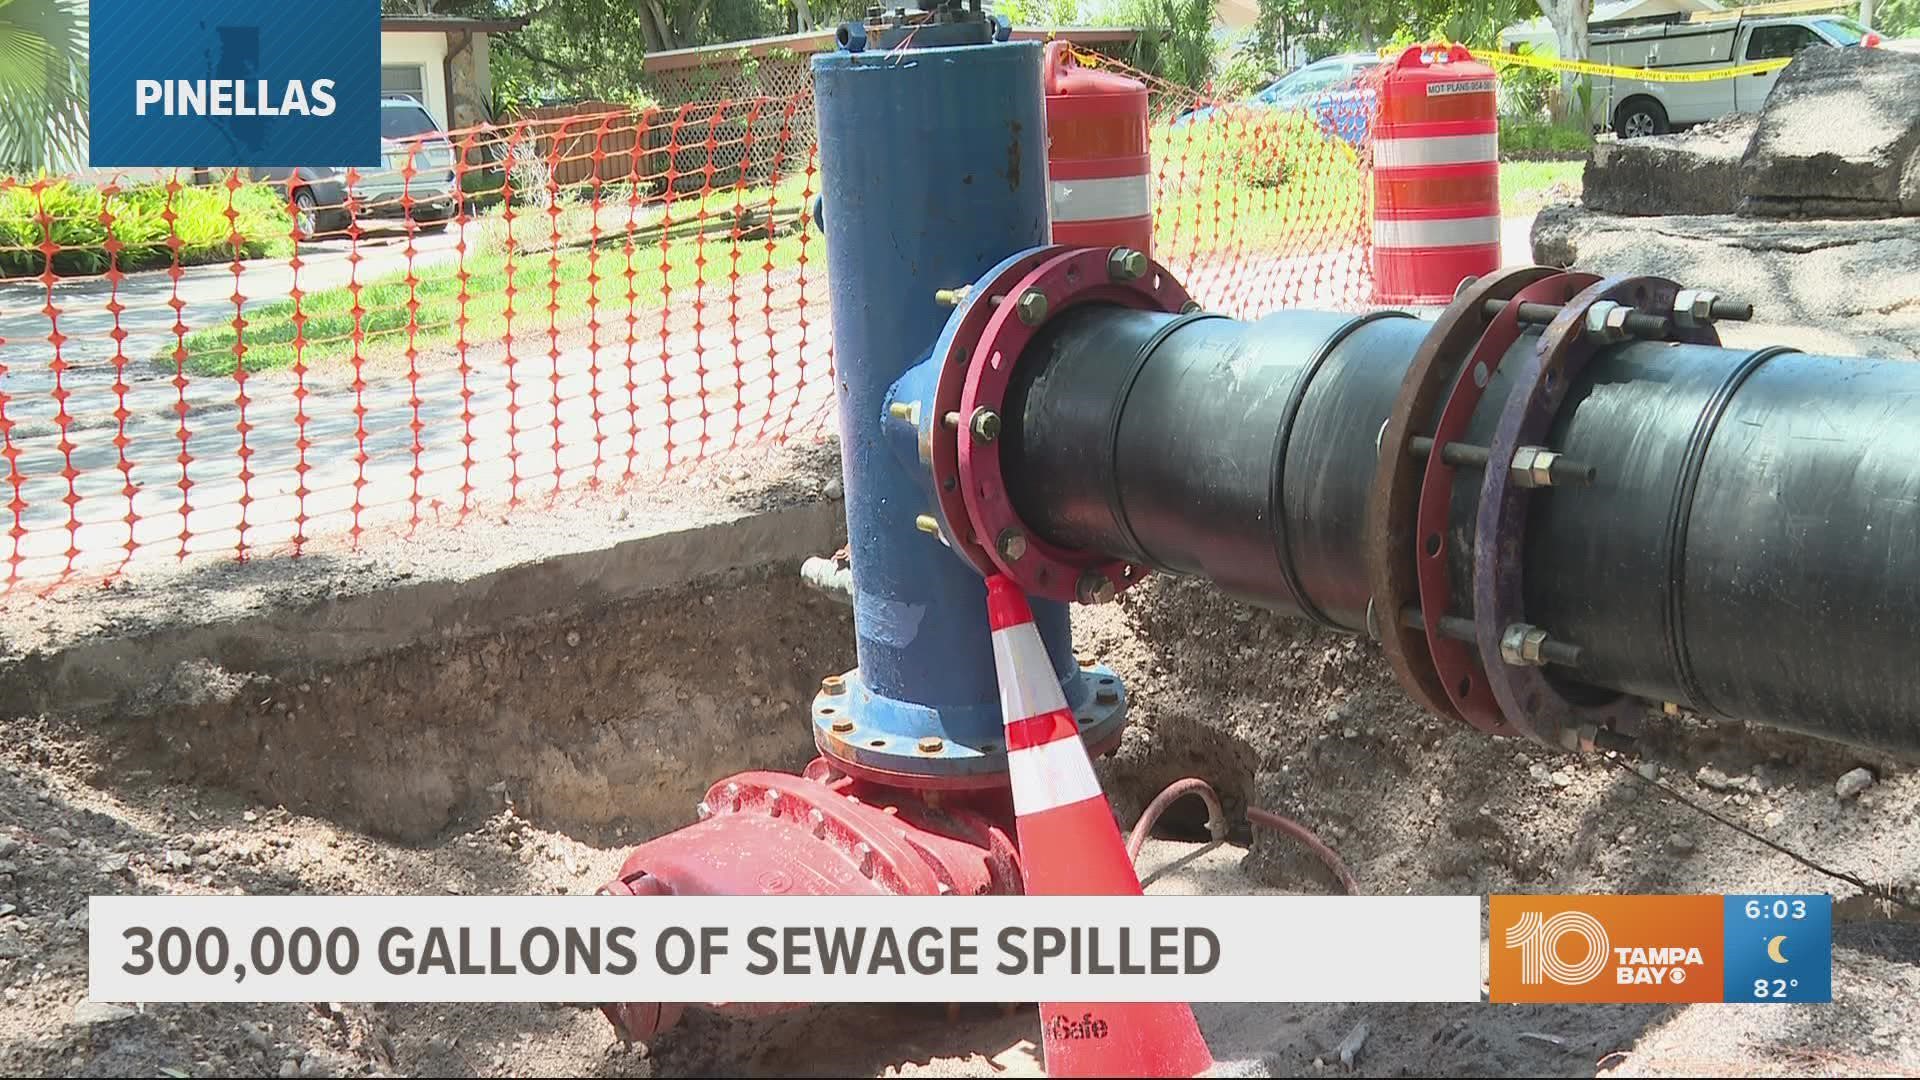 The sewage spilled after a pipe burst last weekend.